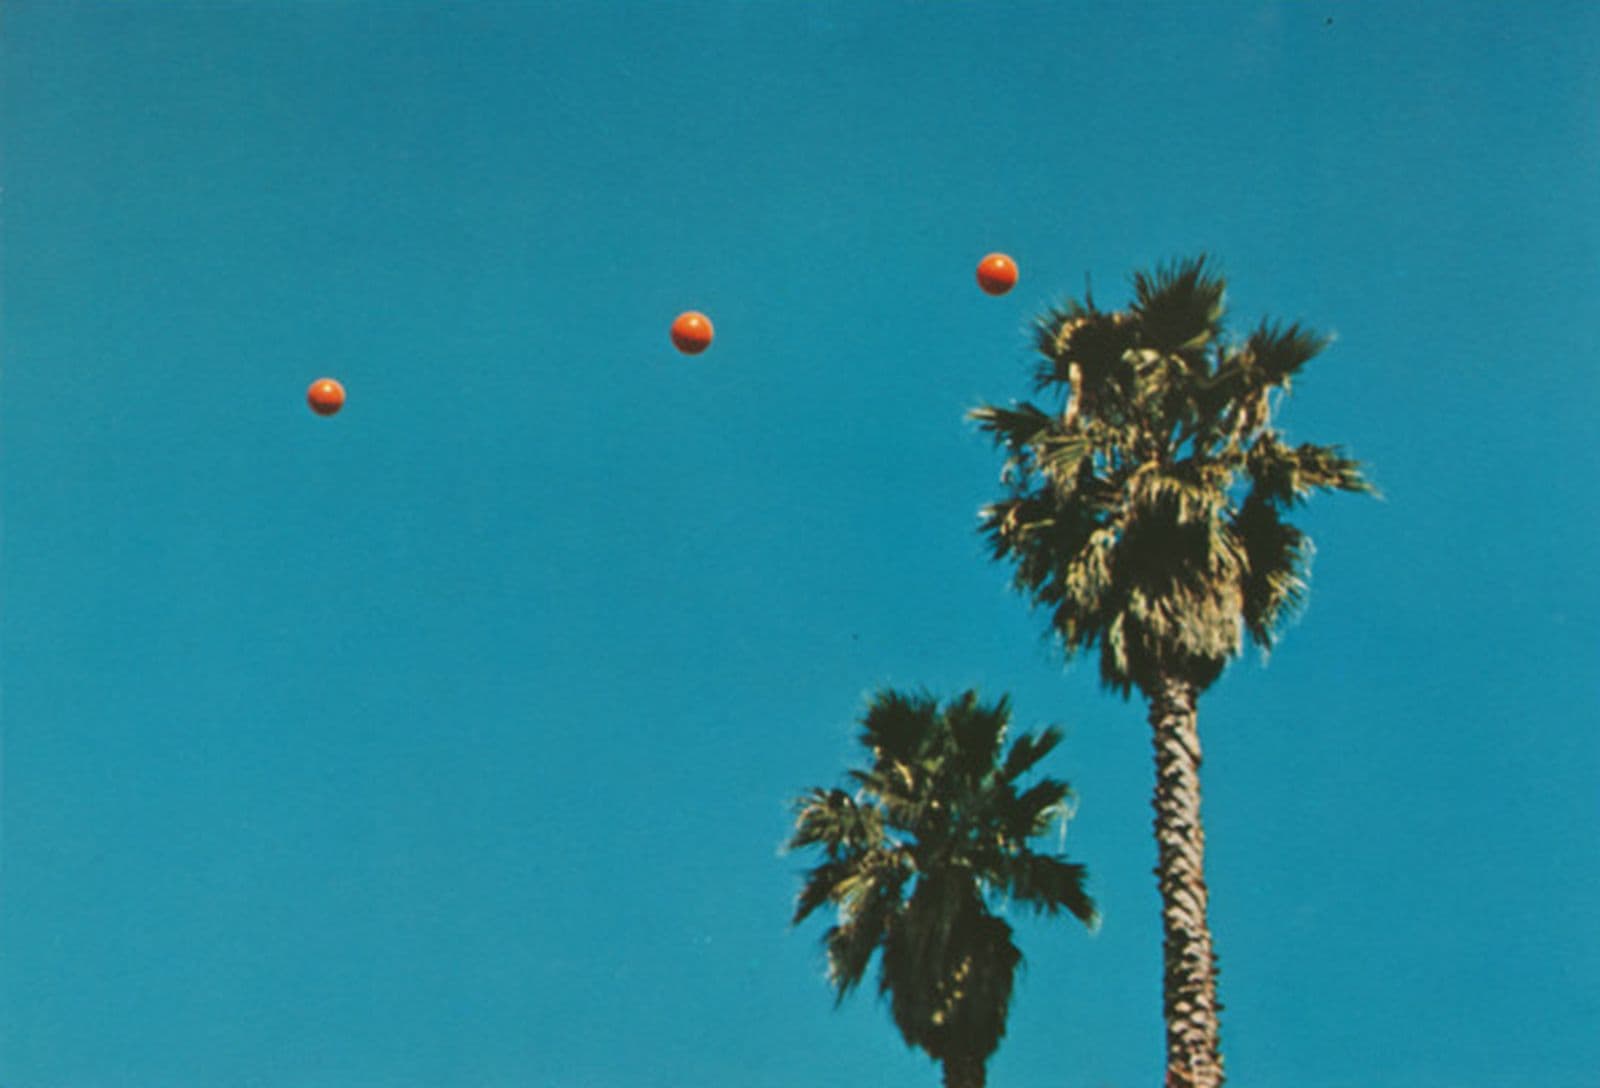 Three orange balls are mid-air with a bright blue sky and the tops of two palm trees in the background